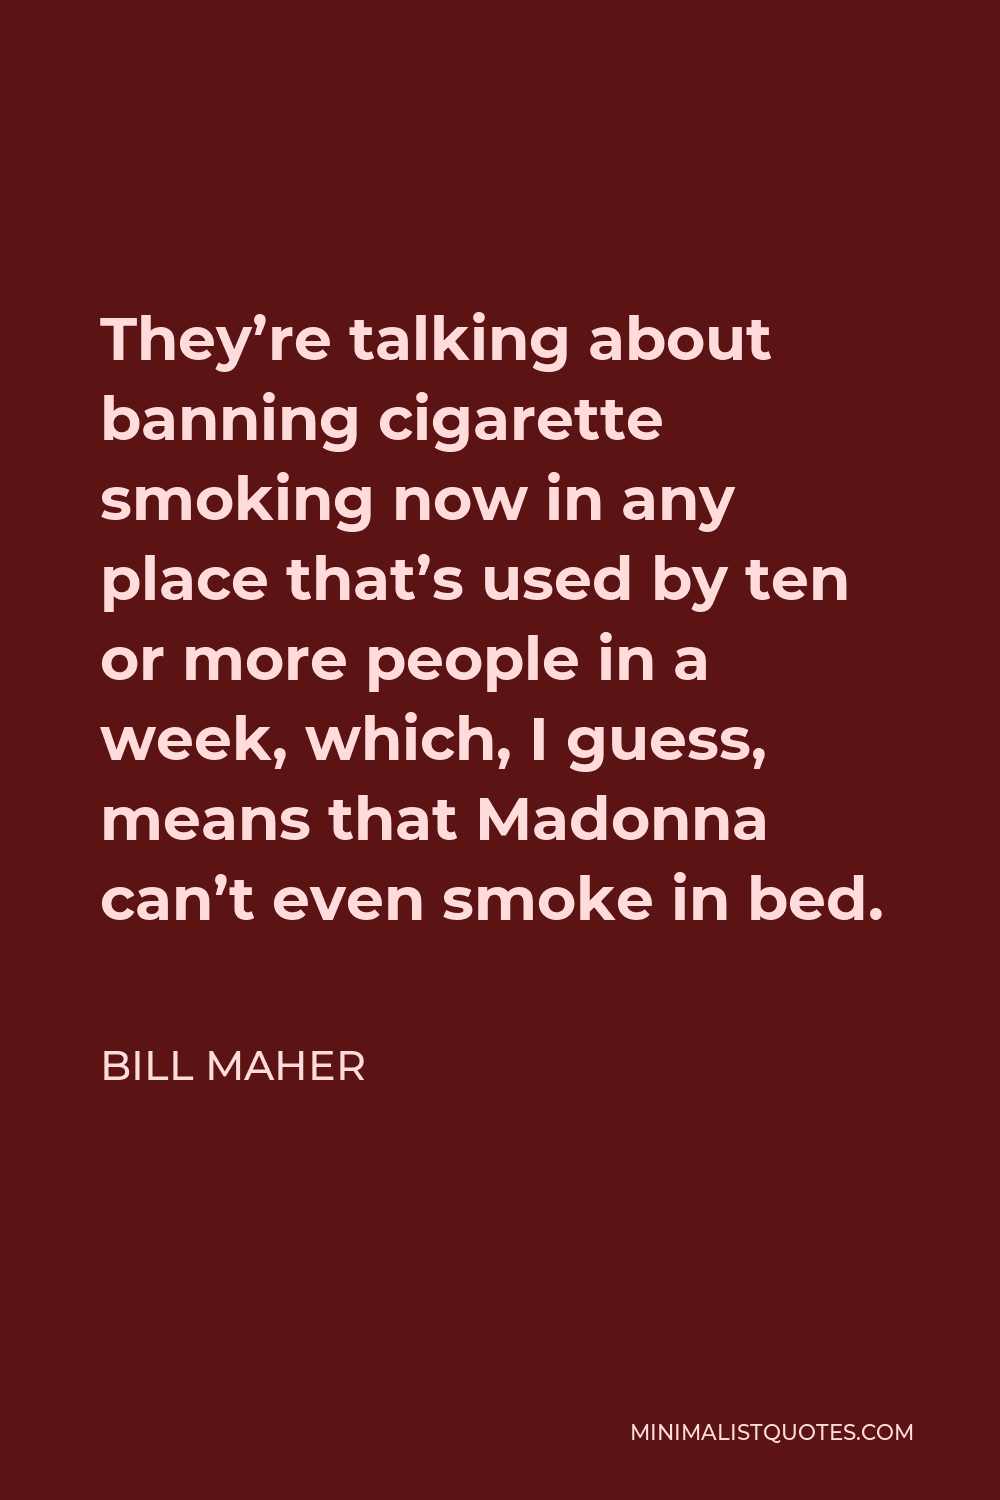 Bill Maher Quote - They’re talking about banning cigarette smoking now in any place that’s used by ten or more people in a week, which, I guess, means that Madonna can’t even smoke in bed.